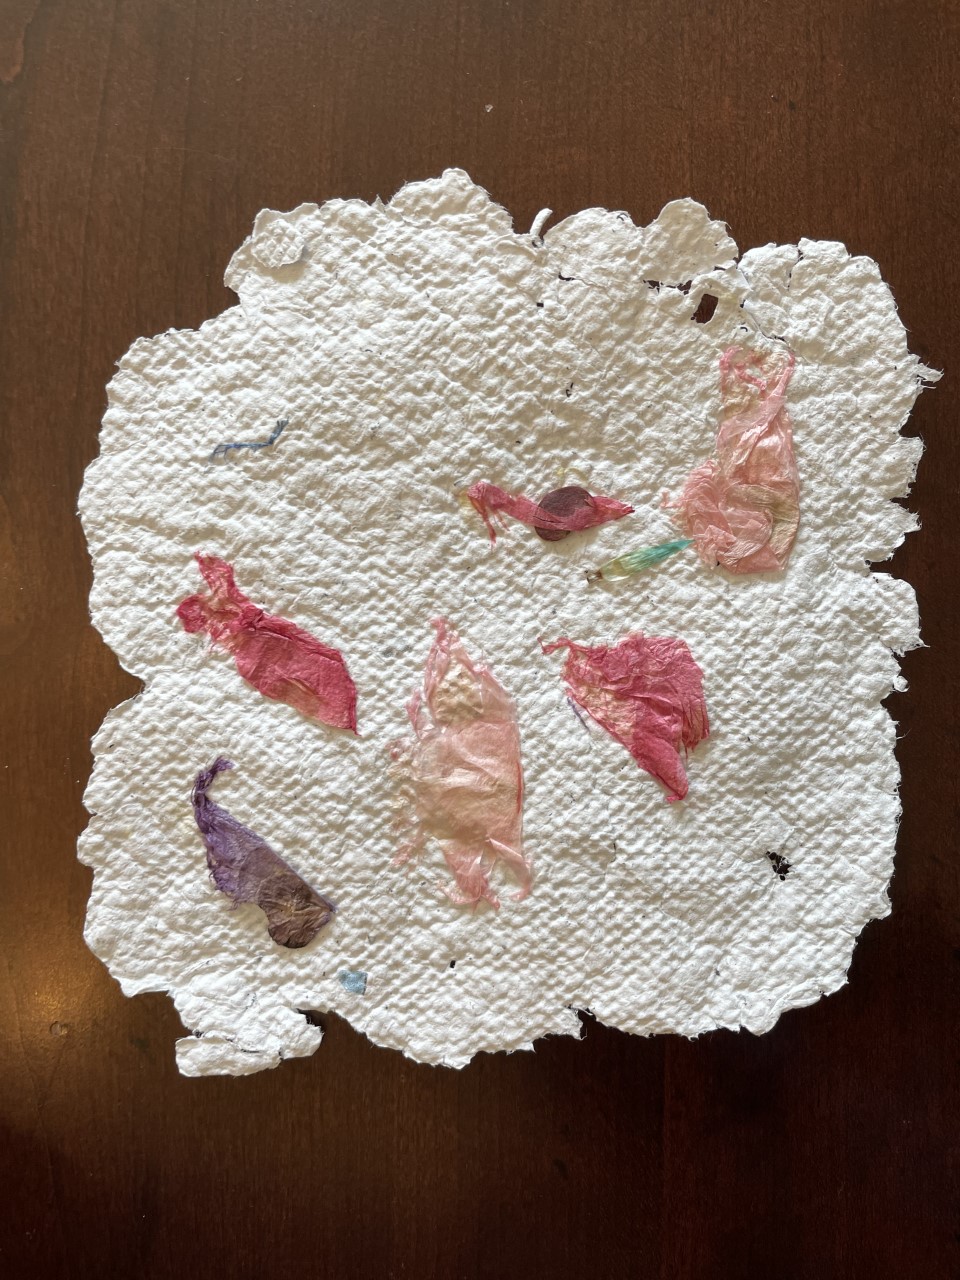 handmade textured paper in irregular shape scattered with flower petals